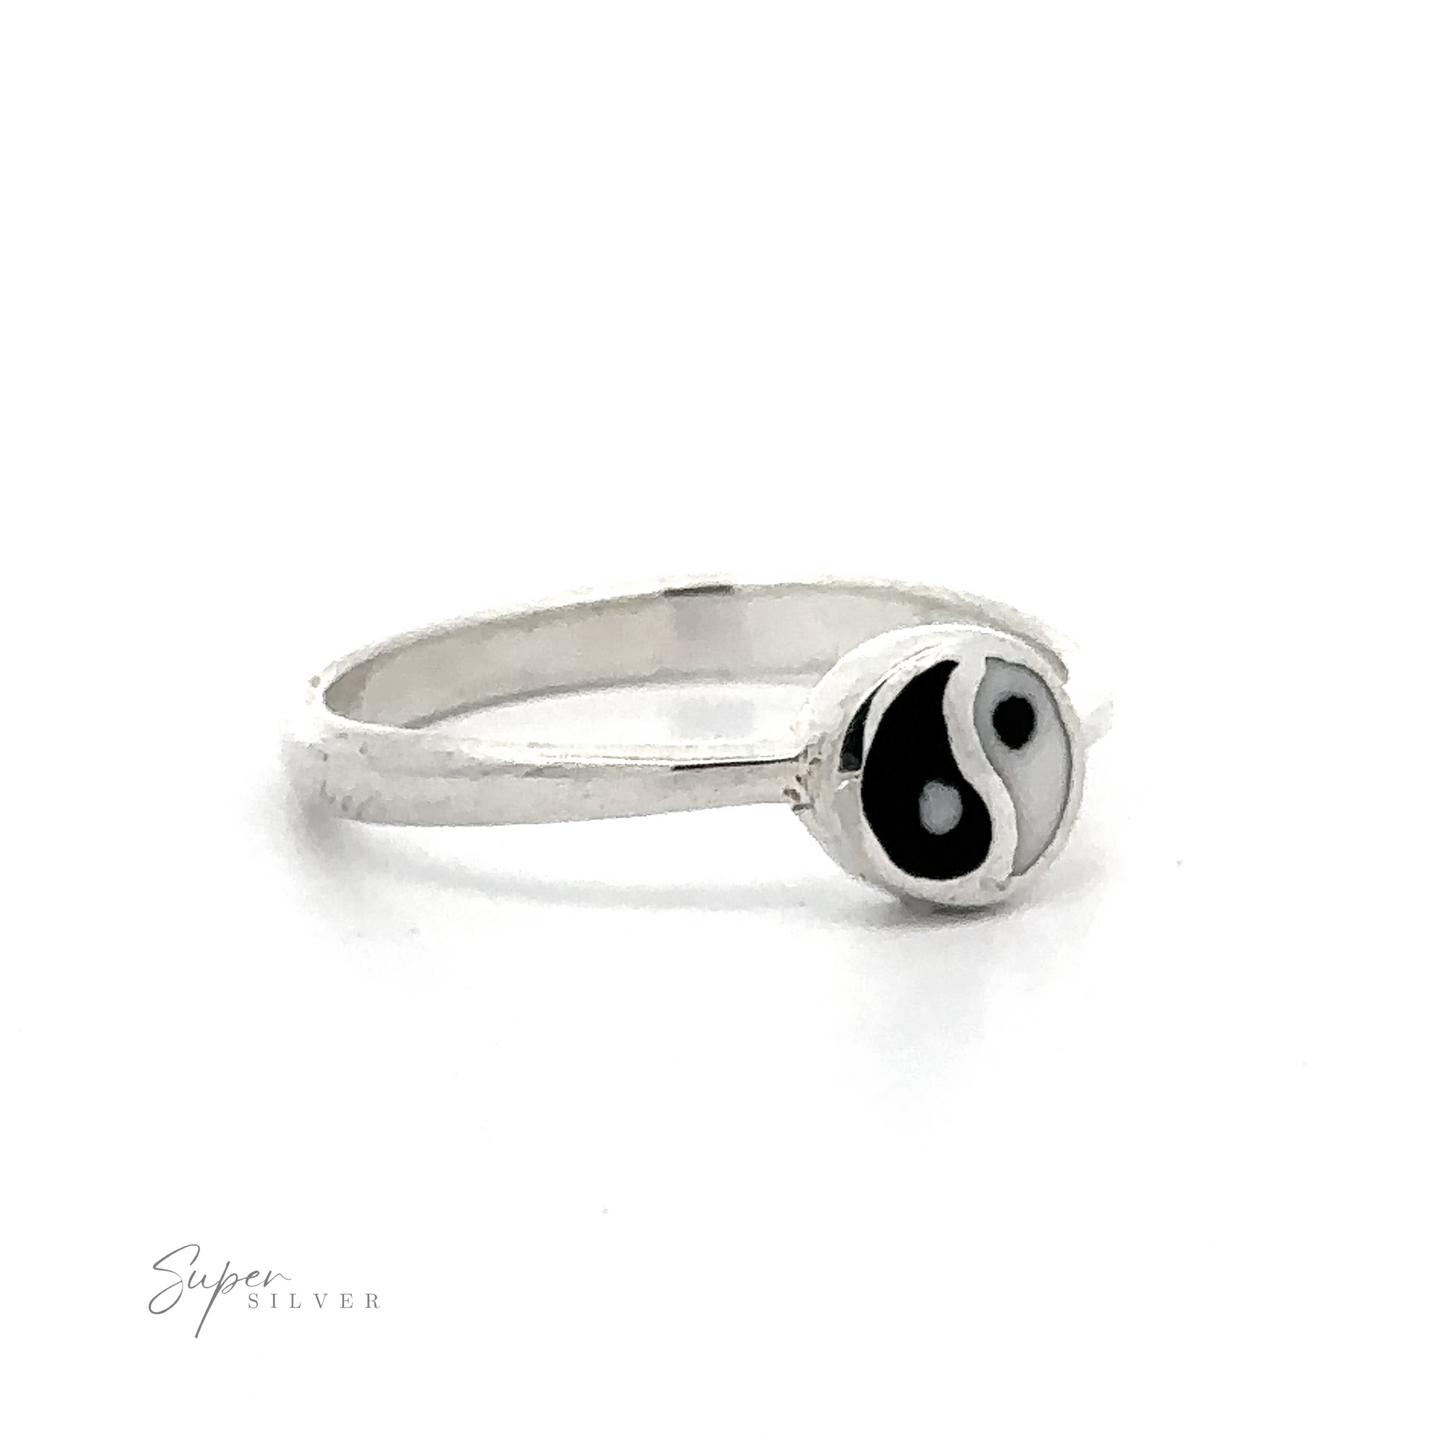 A Small Yin-Yang Ring that exemplifies harmony and balance with its black and white symbolism.